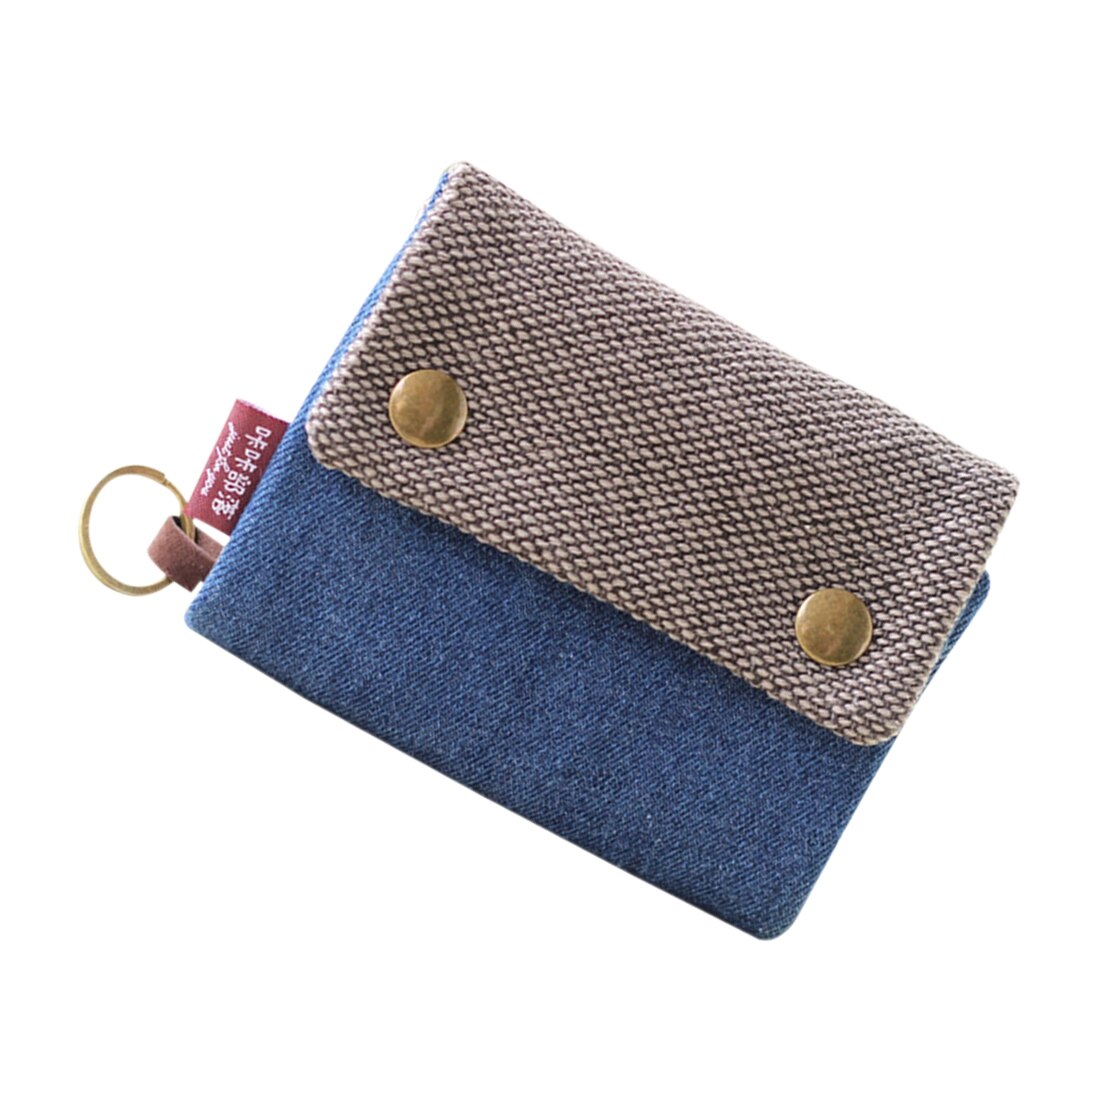 Unisex Boy Girl's Multifunction Coin Purse Three Layer Folded Manual Canvas Wallet Bag With Multi Card Holder - ebowsos